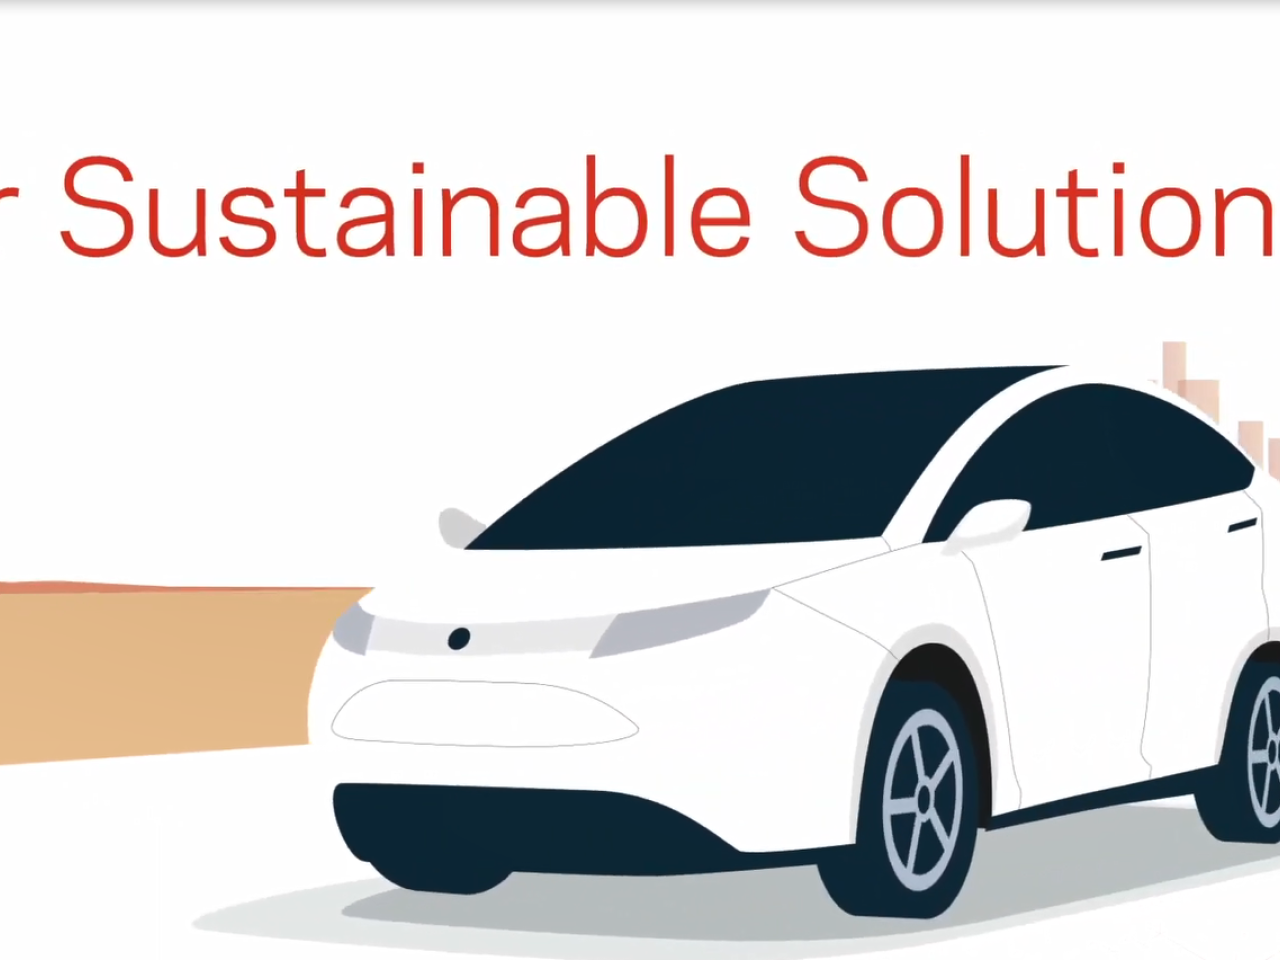 A digital white car and "Our sustainable solutions" with Chemours logo.